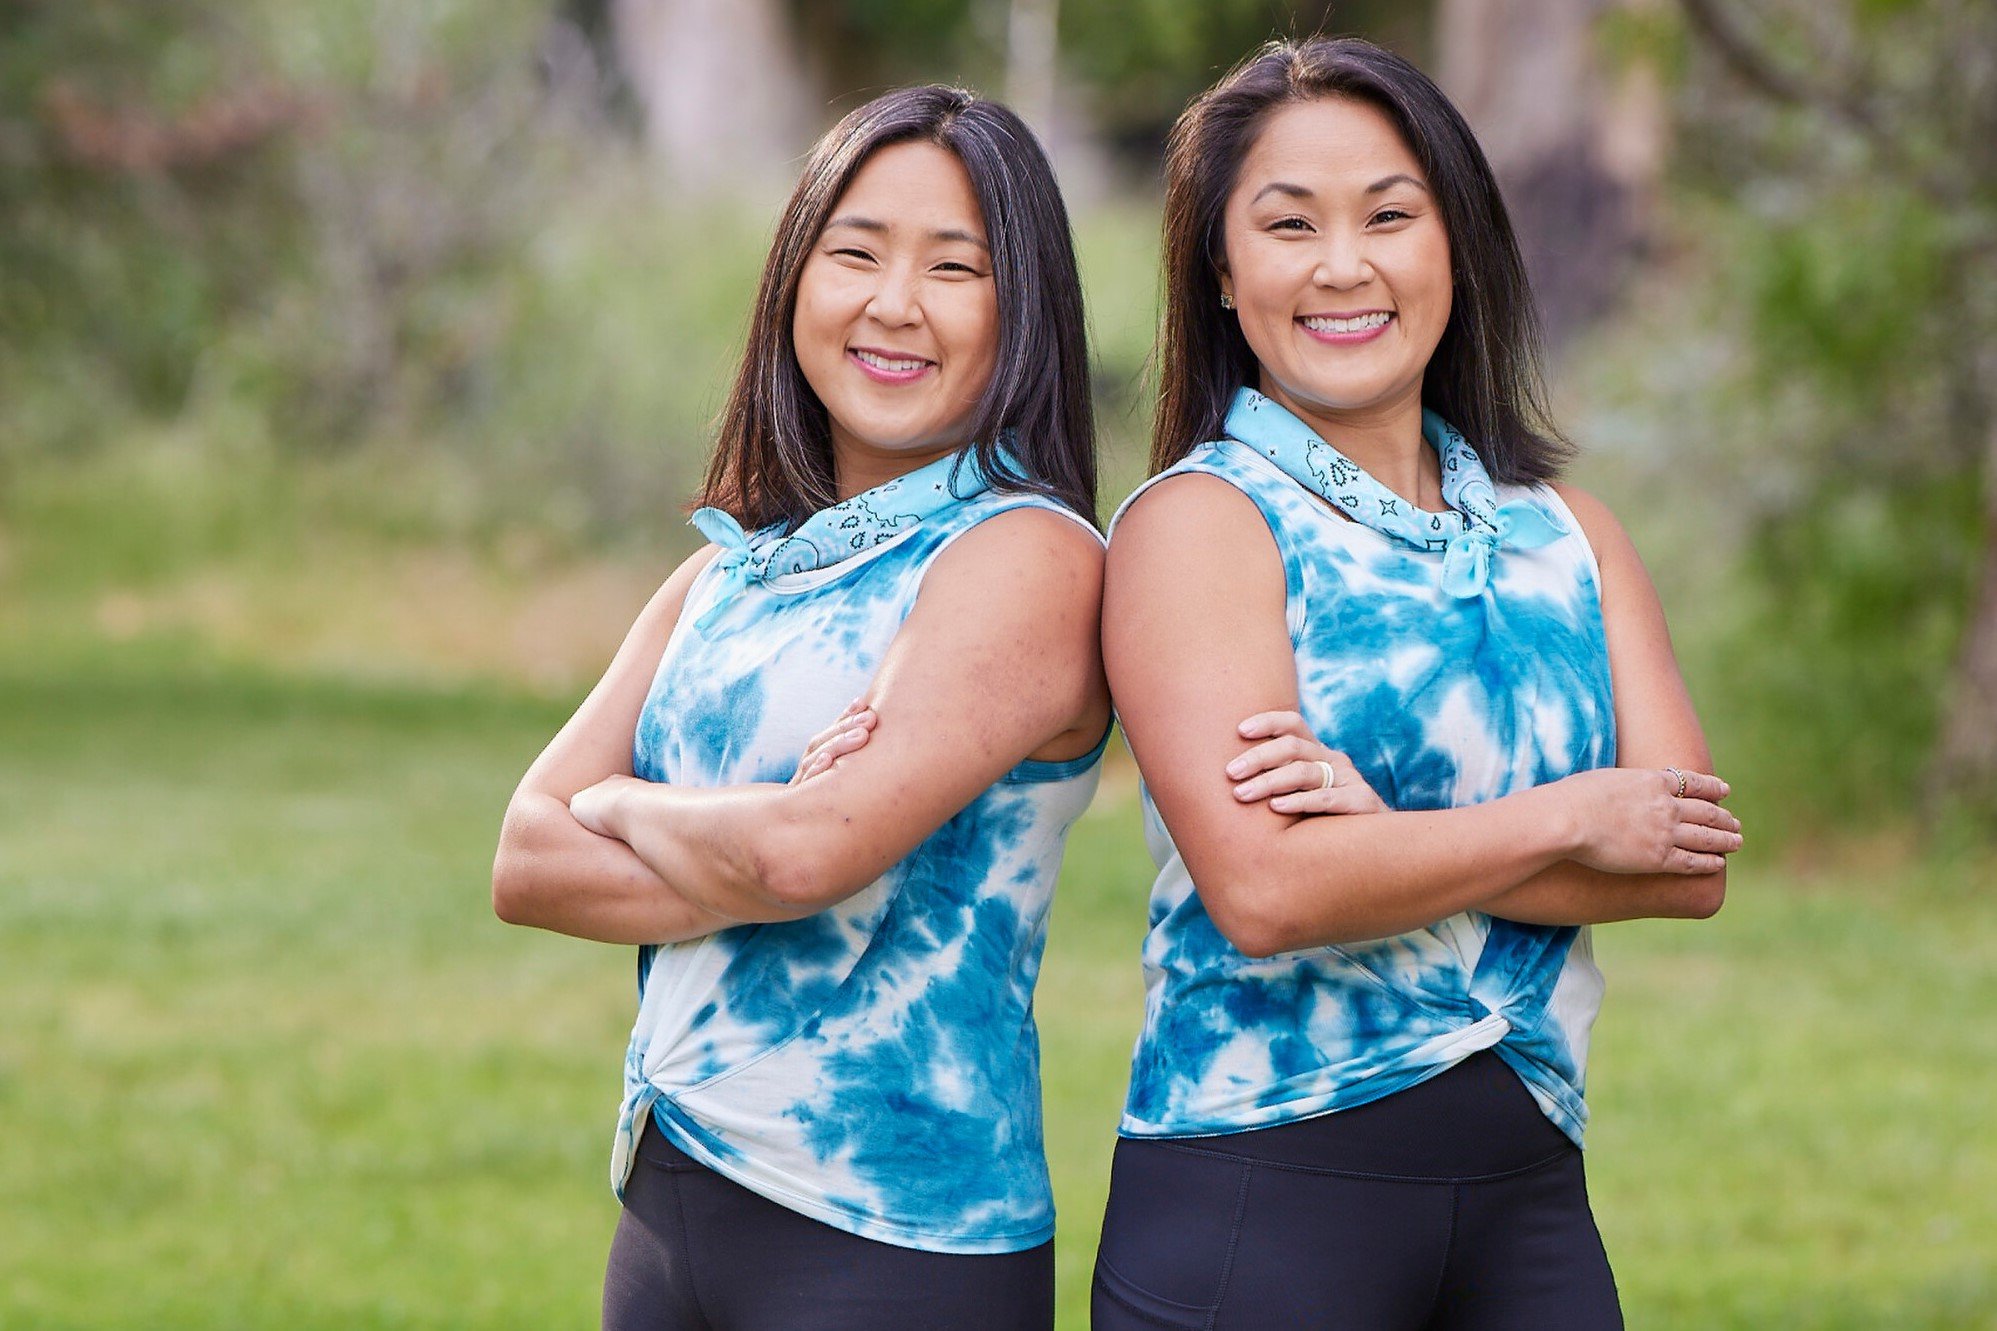 Emily Bushnell and Molly Sinert, who star in 'The Amazing Race 34' on CBS, pose for promotional pictures. The twins wear the same blue and white tie dye tank top, light blue bandana around their necks, and black leggings.